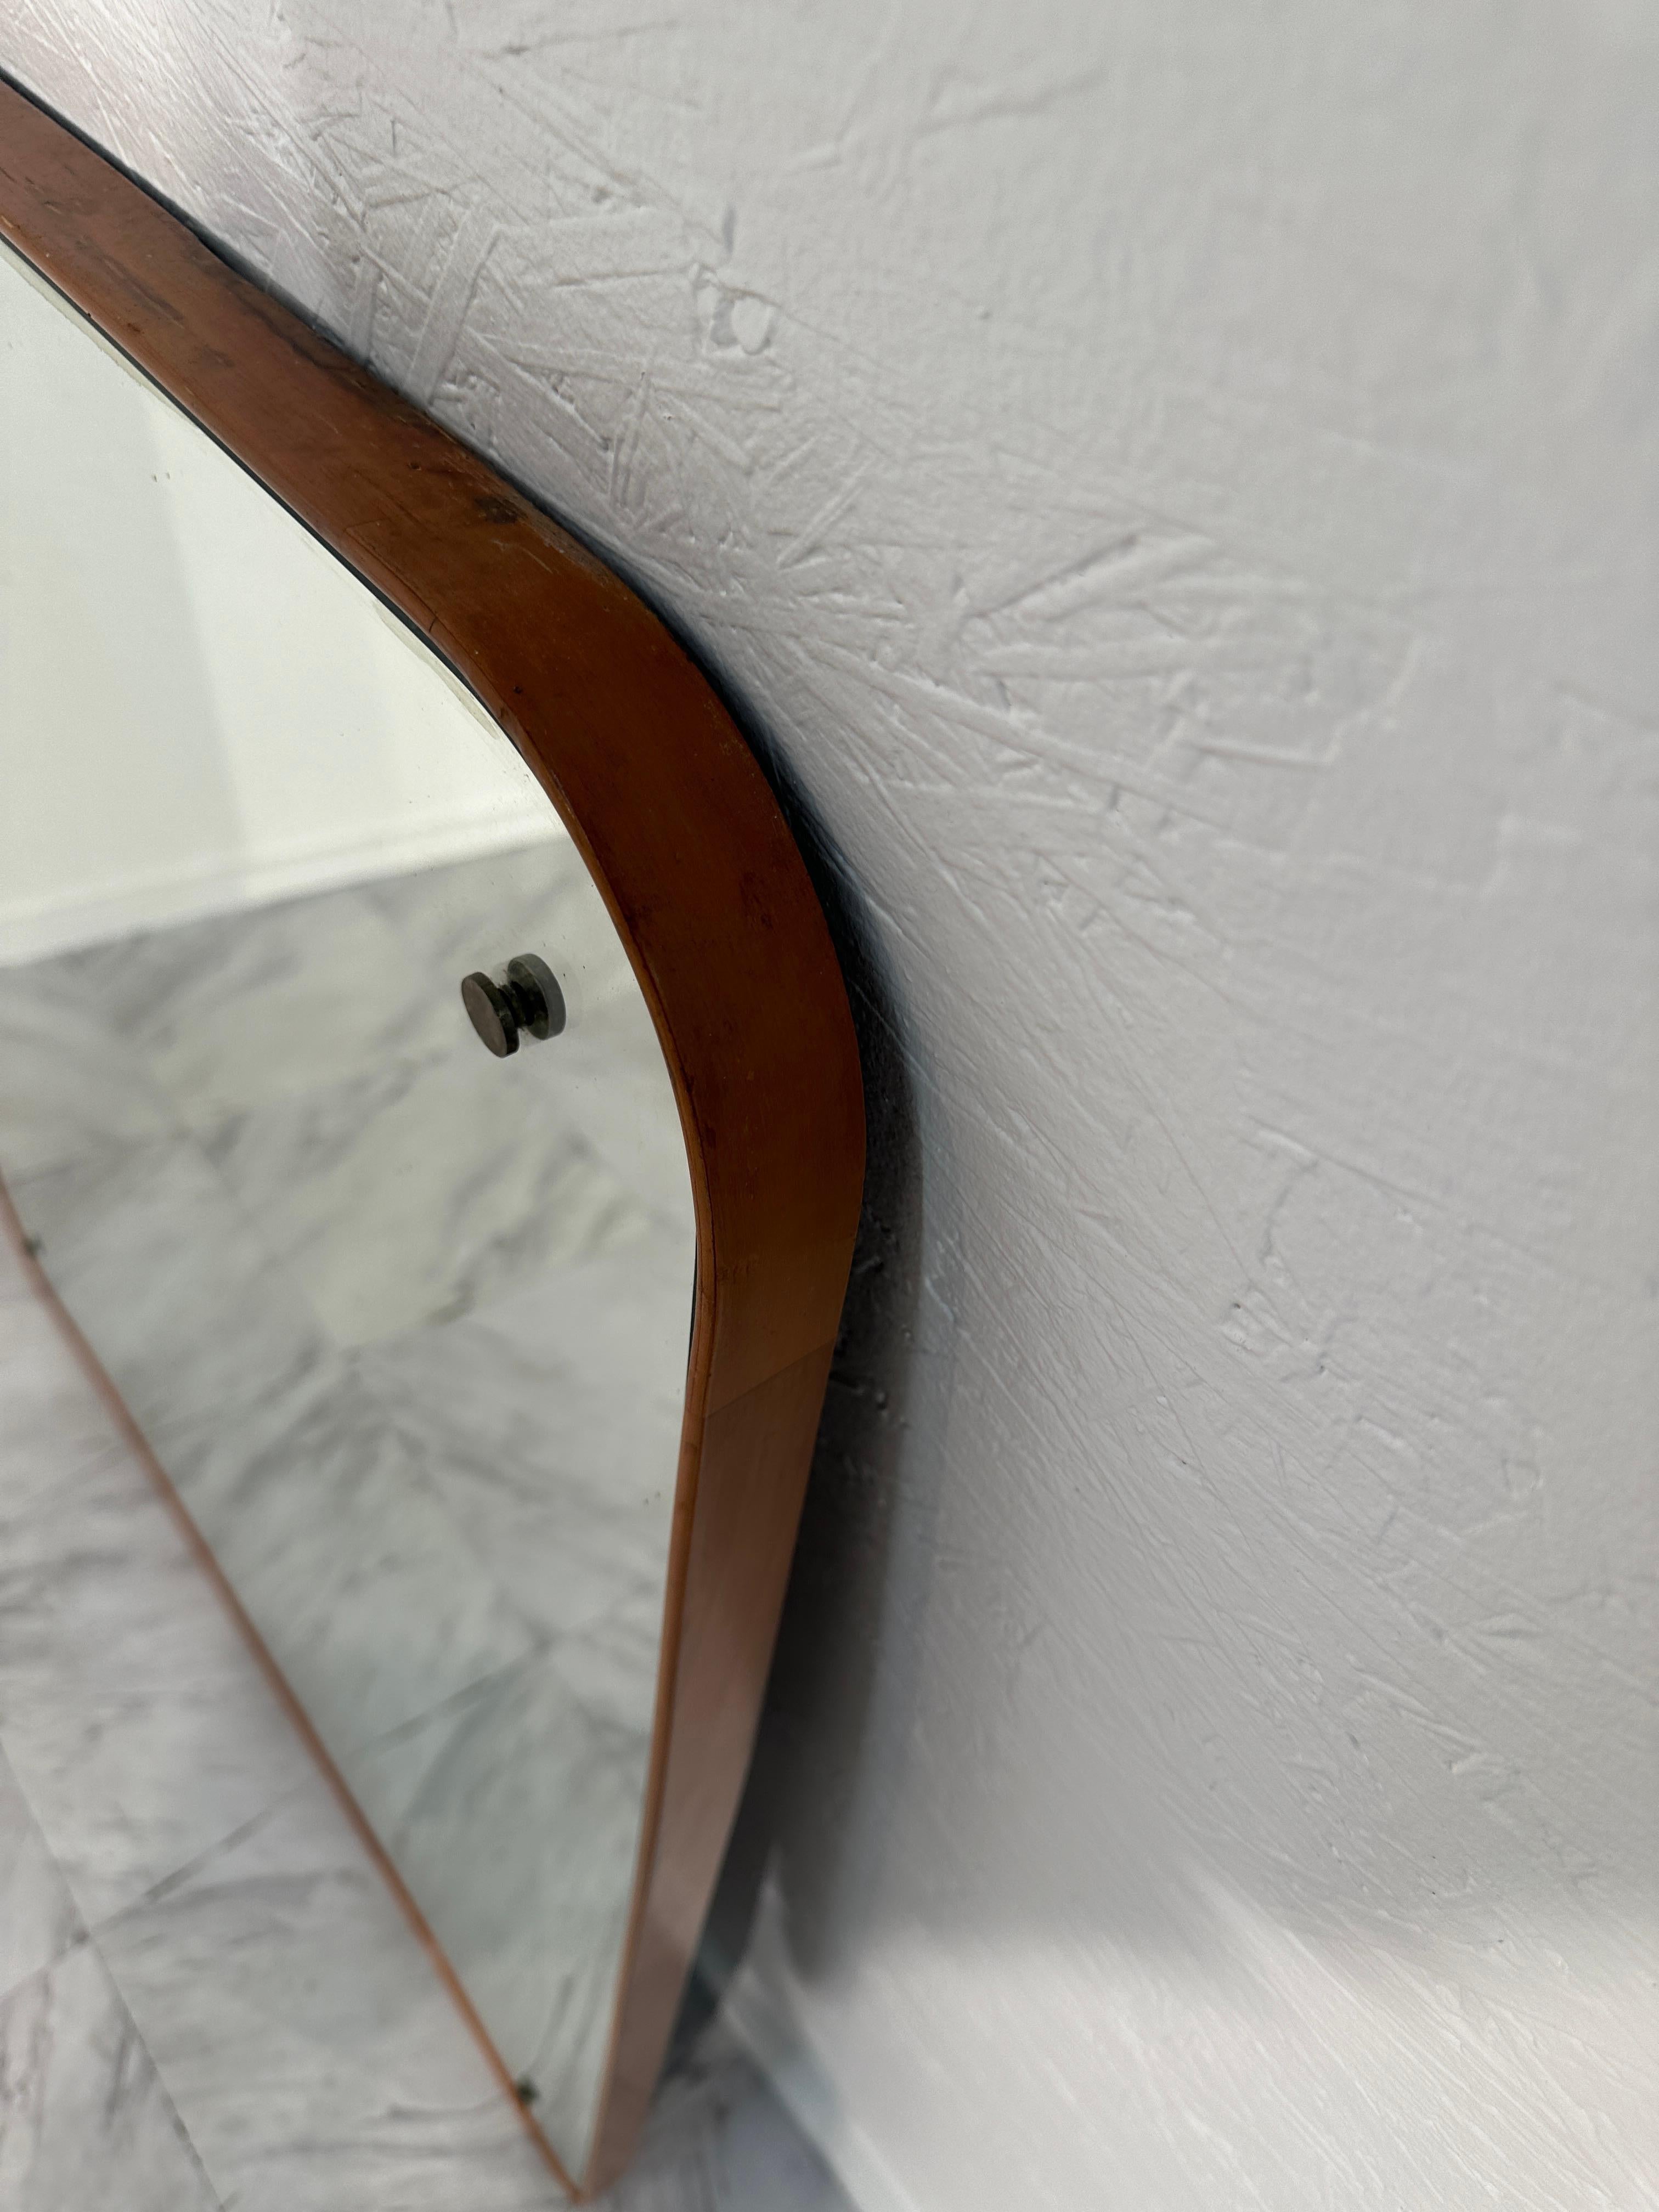 The Oversize Vintage Italian Wall Mirror from the 1970s boasts a commanding presence. Its brass frame, adorned with an original patina, adds warmth and character to any room. Crafted with Italian craftsmanship, this mirror exudes timeless elegance,